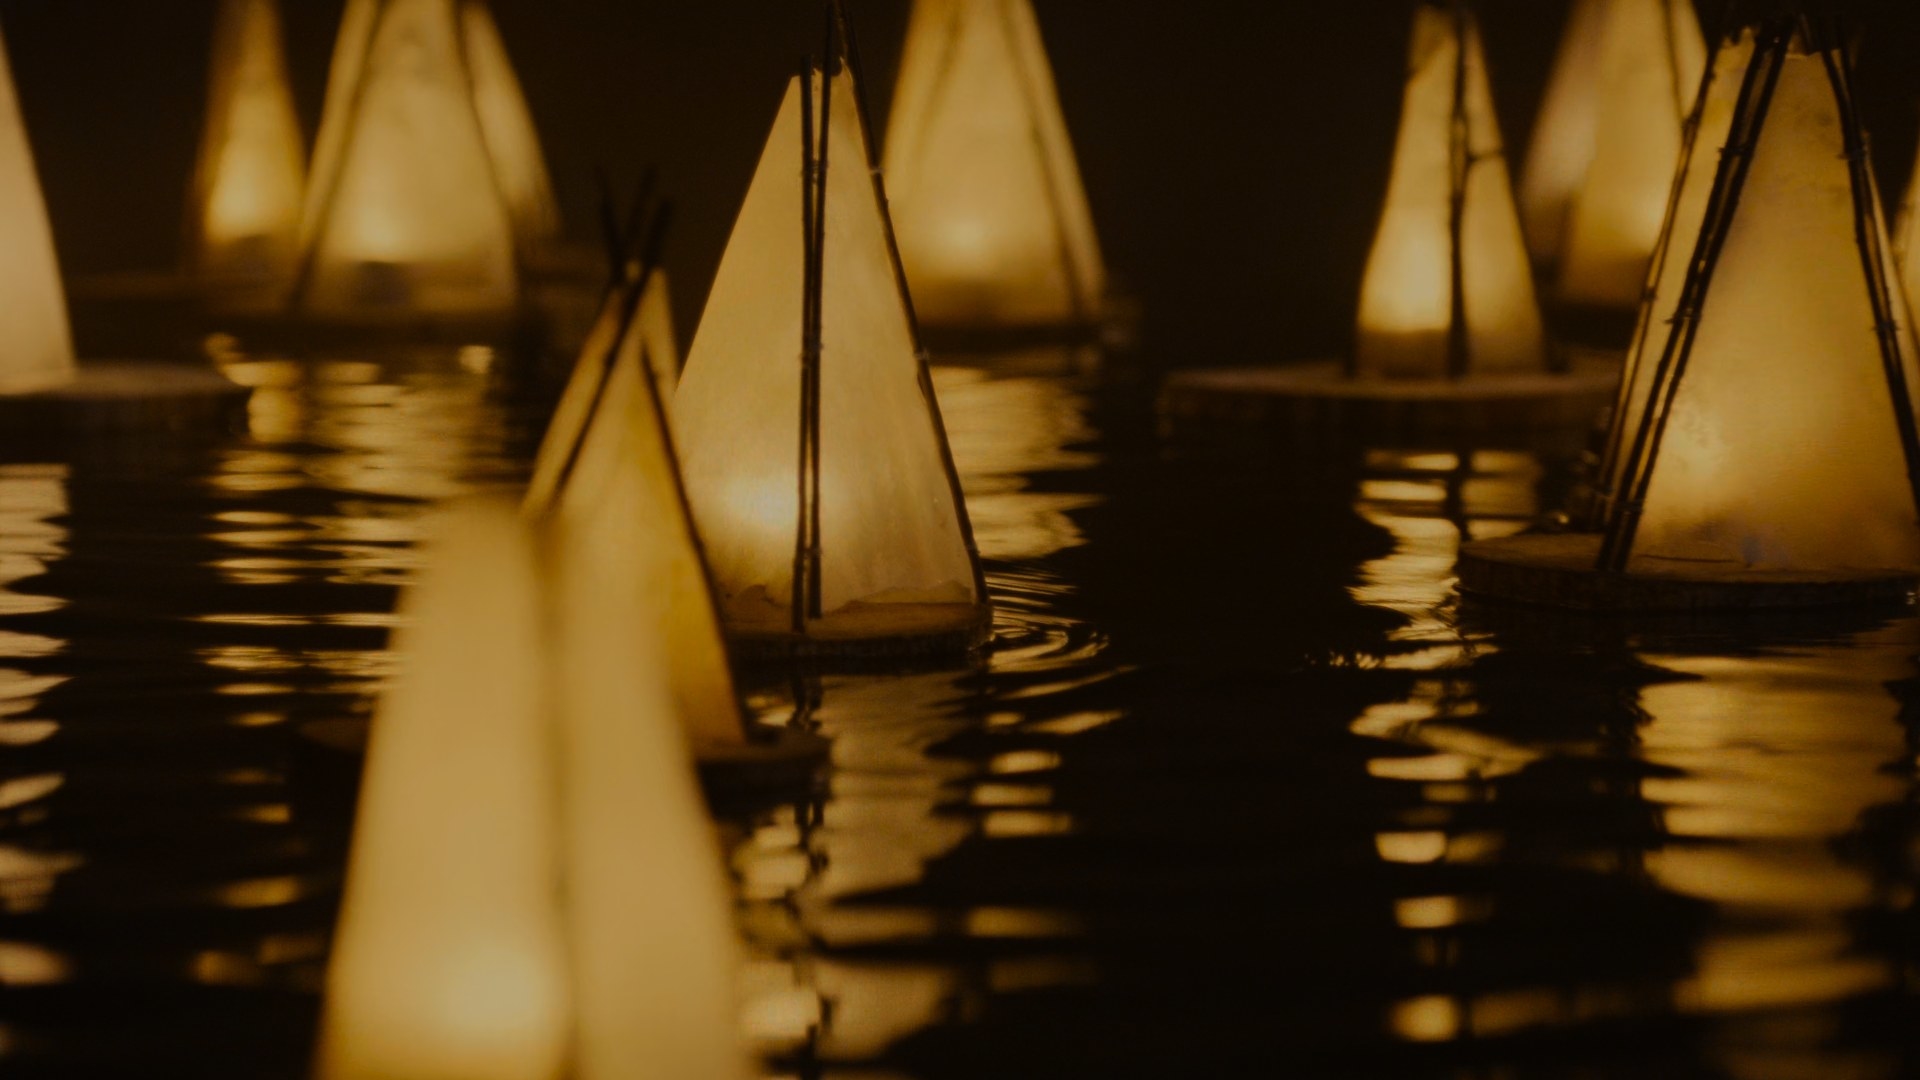 A night-time shot of many triangular lanterns, each with a candle inside, floating down the Taren river on a disc of wood